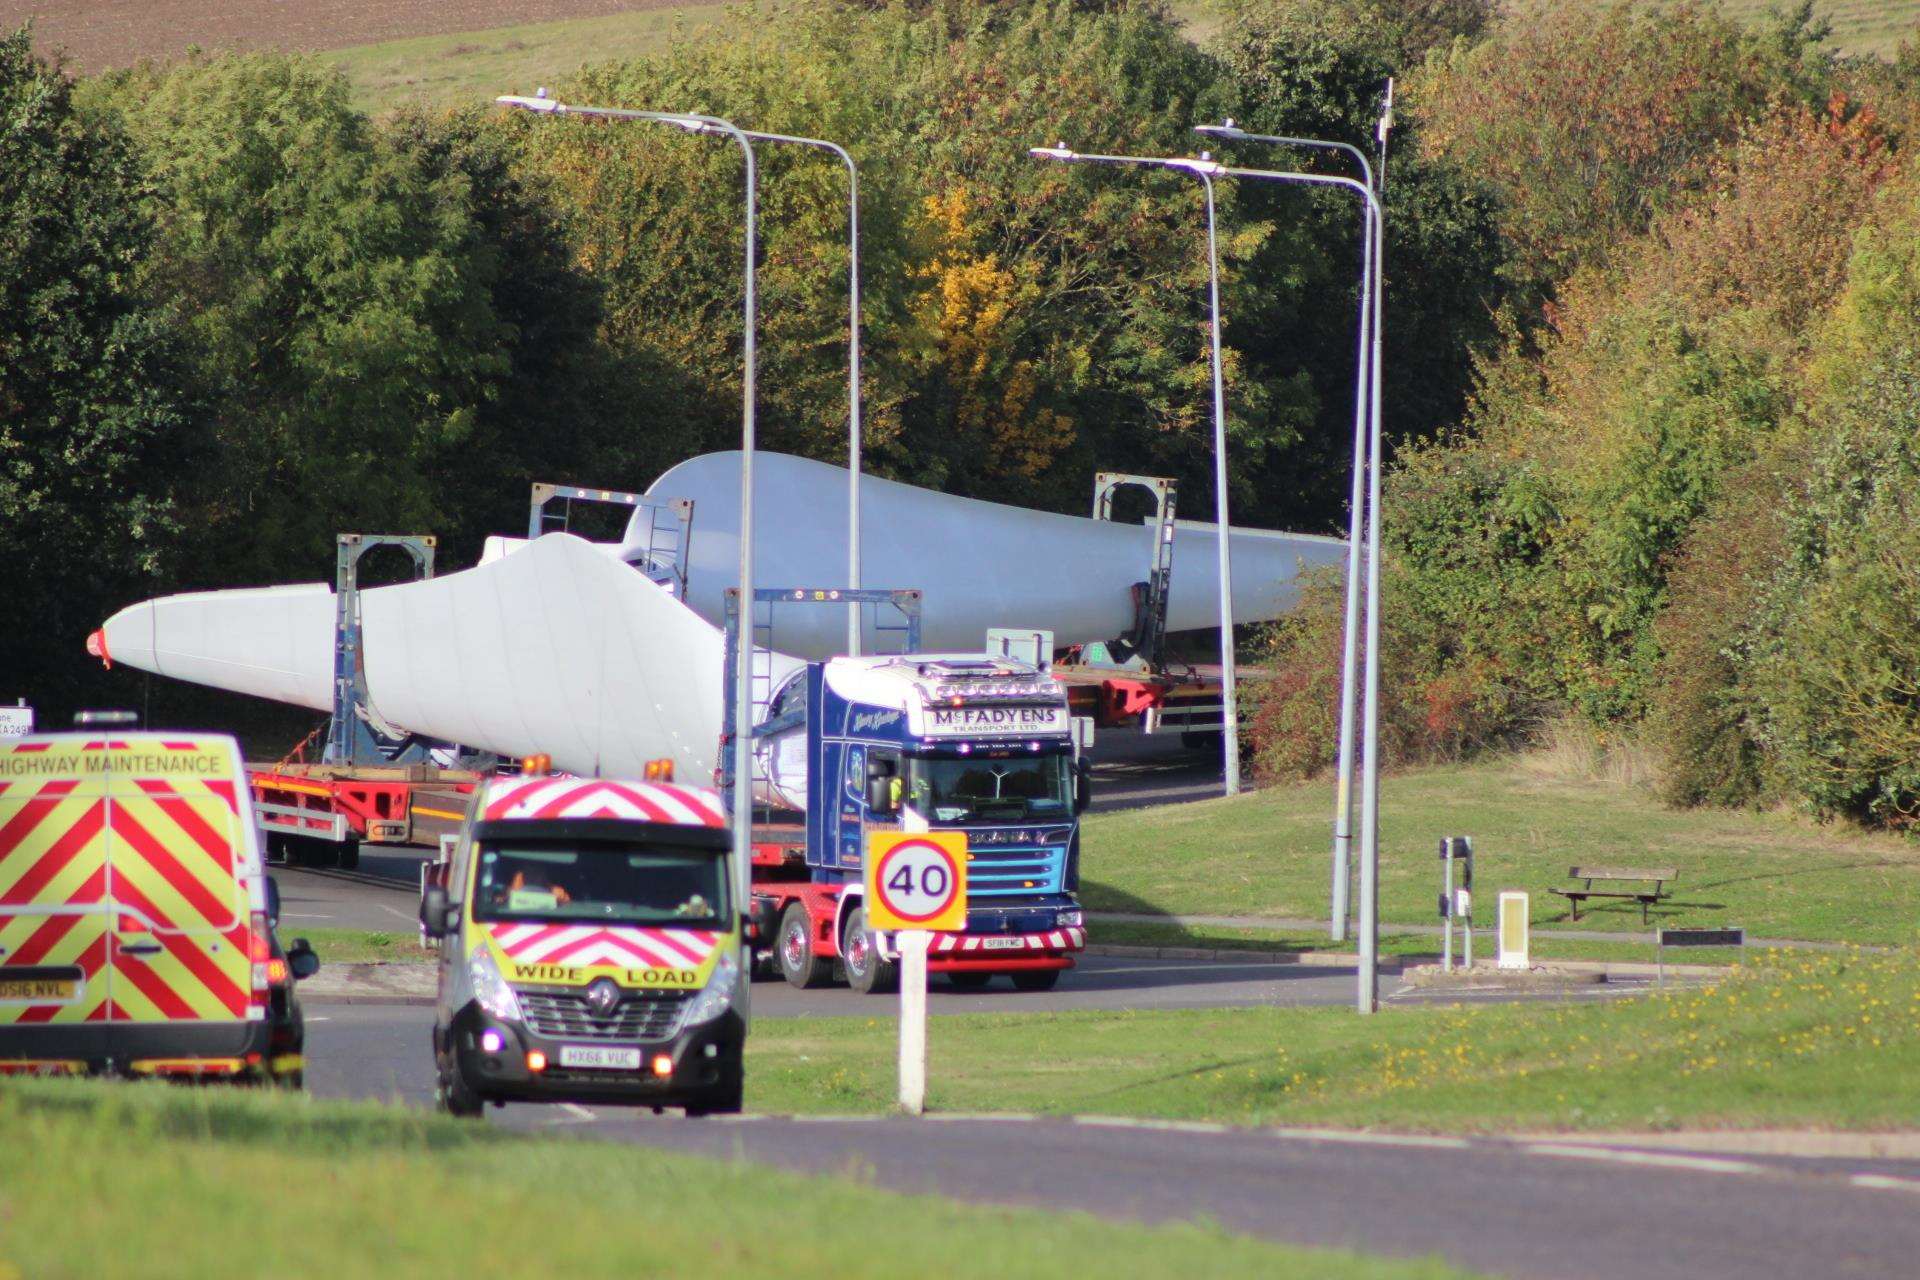 Turbine blades navigate prison roundabout at Eastchurch on the Isle of Sheppey (4761099)